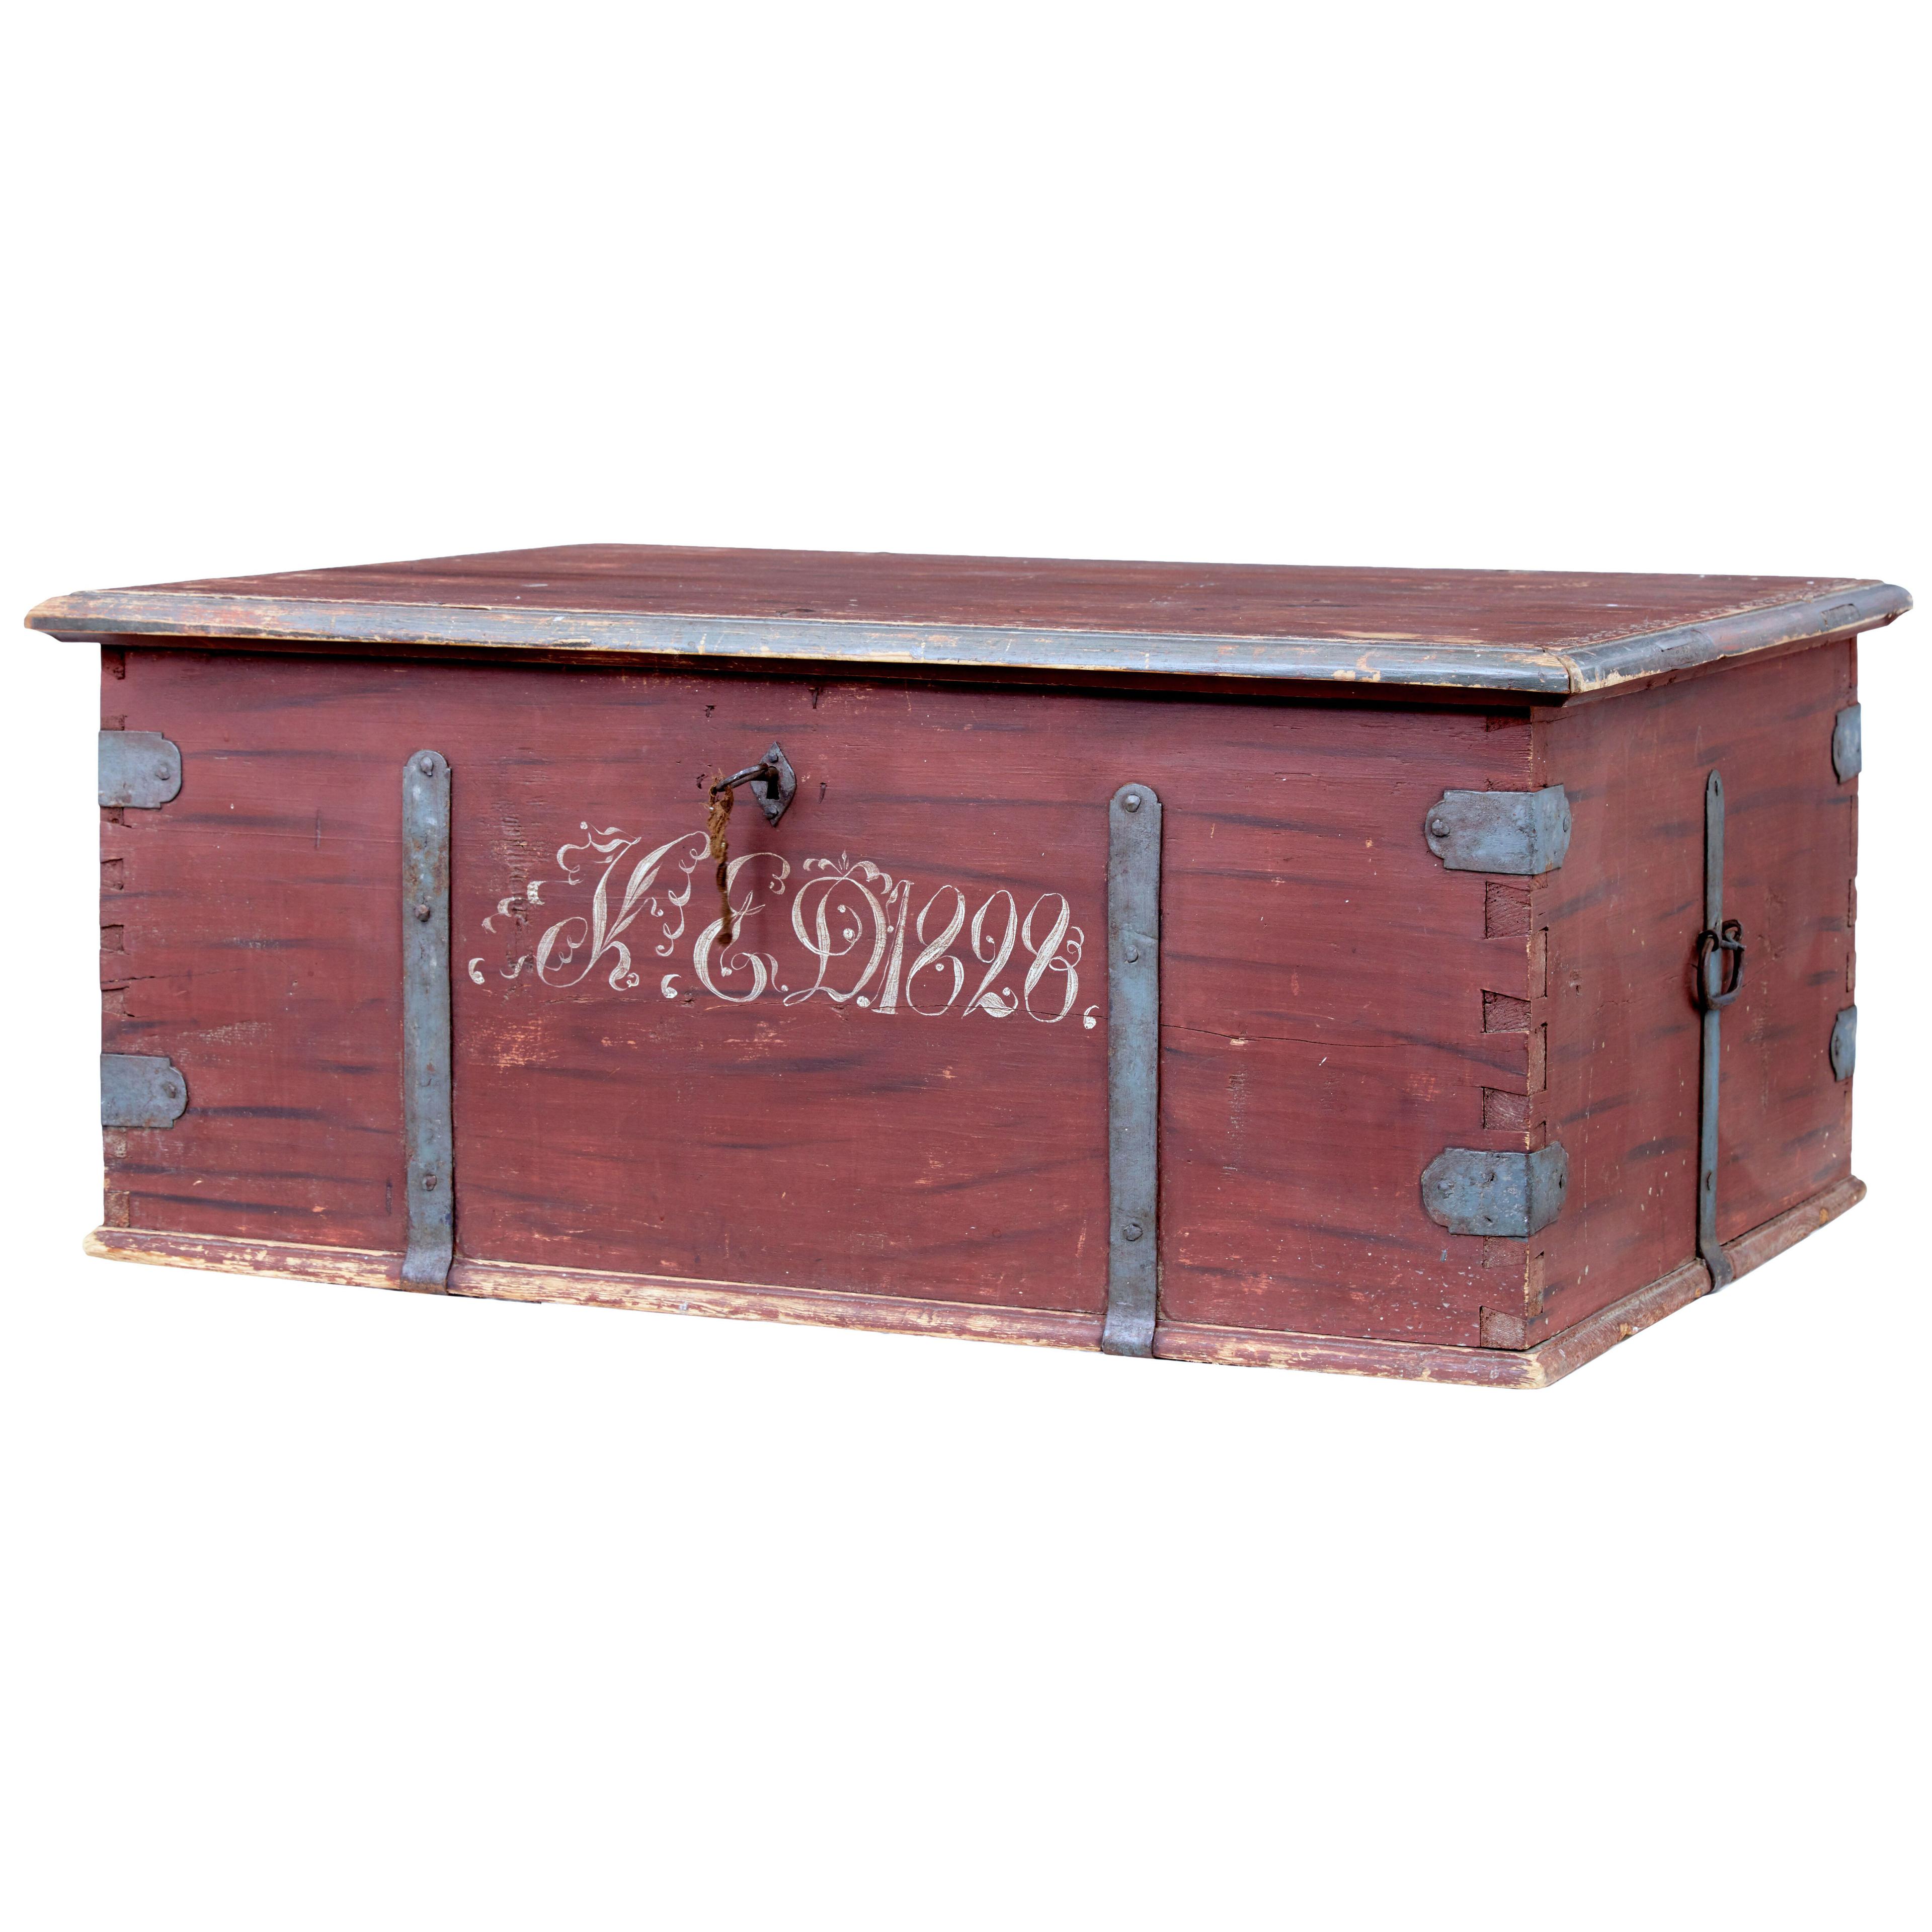 EARLY 19TH CENTURY PAINTED PINE BLANKET BOX